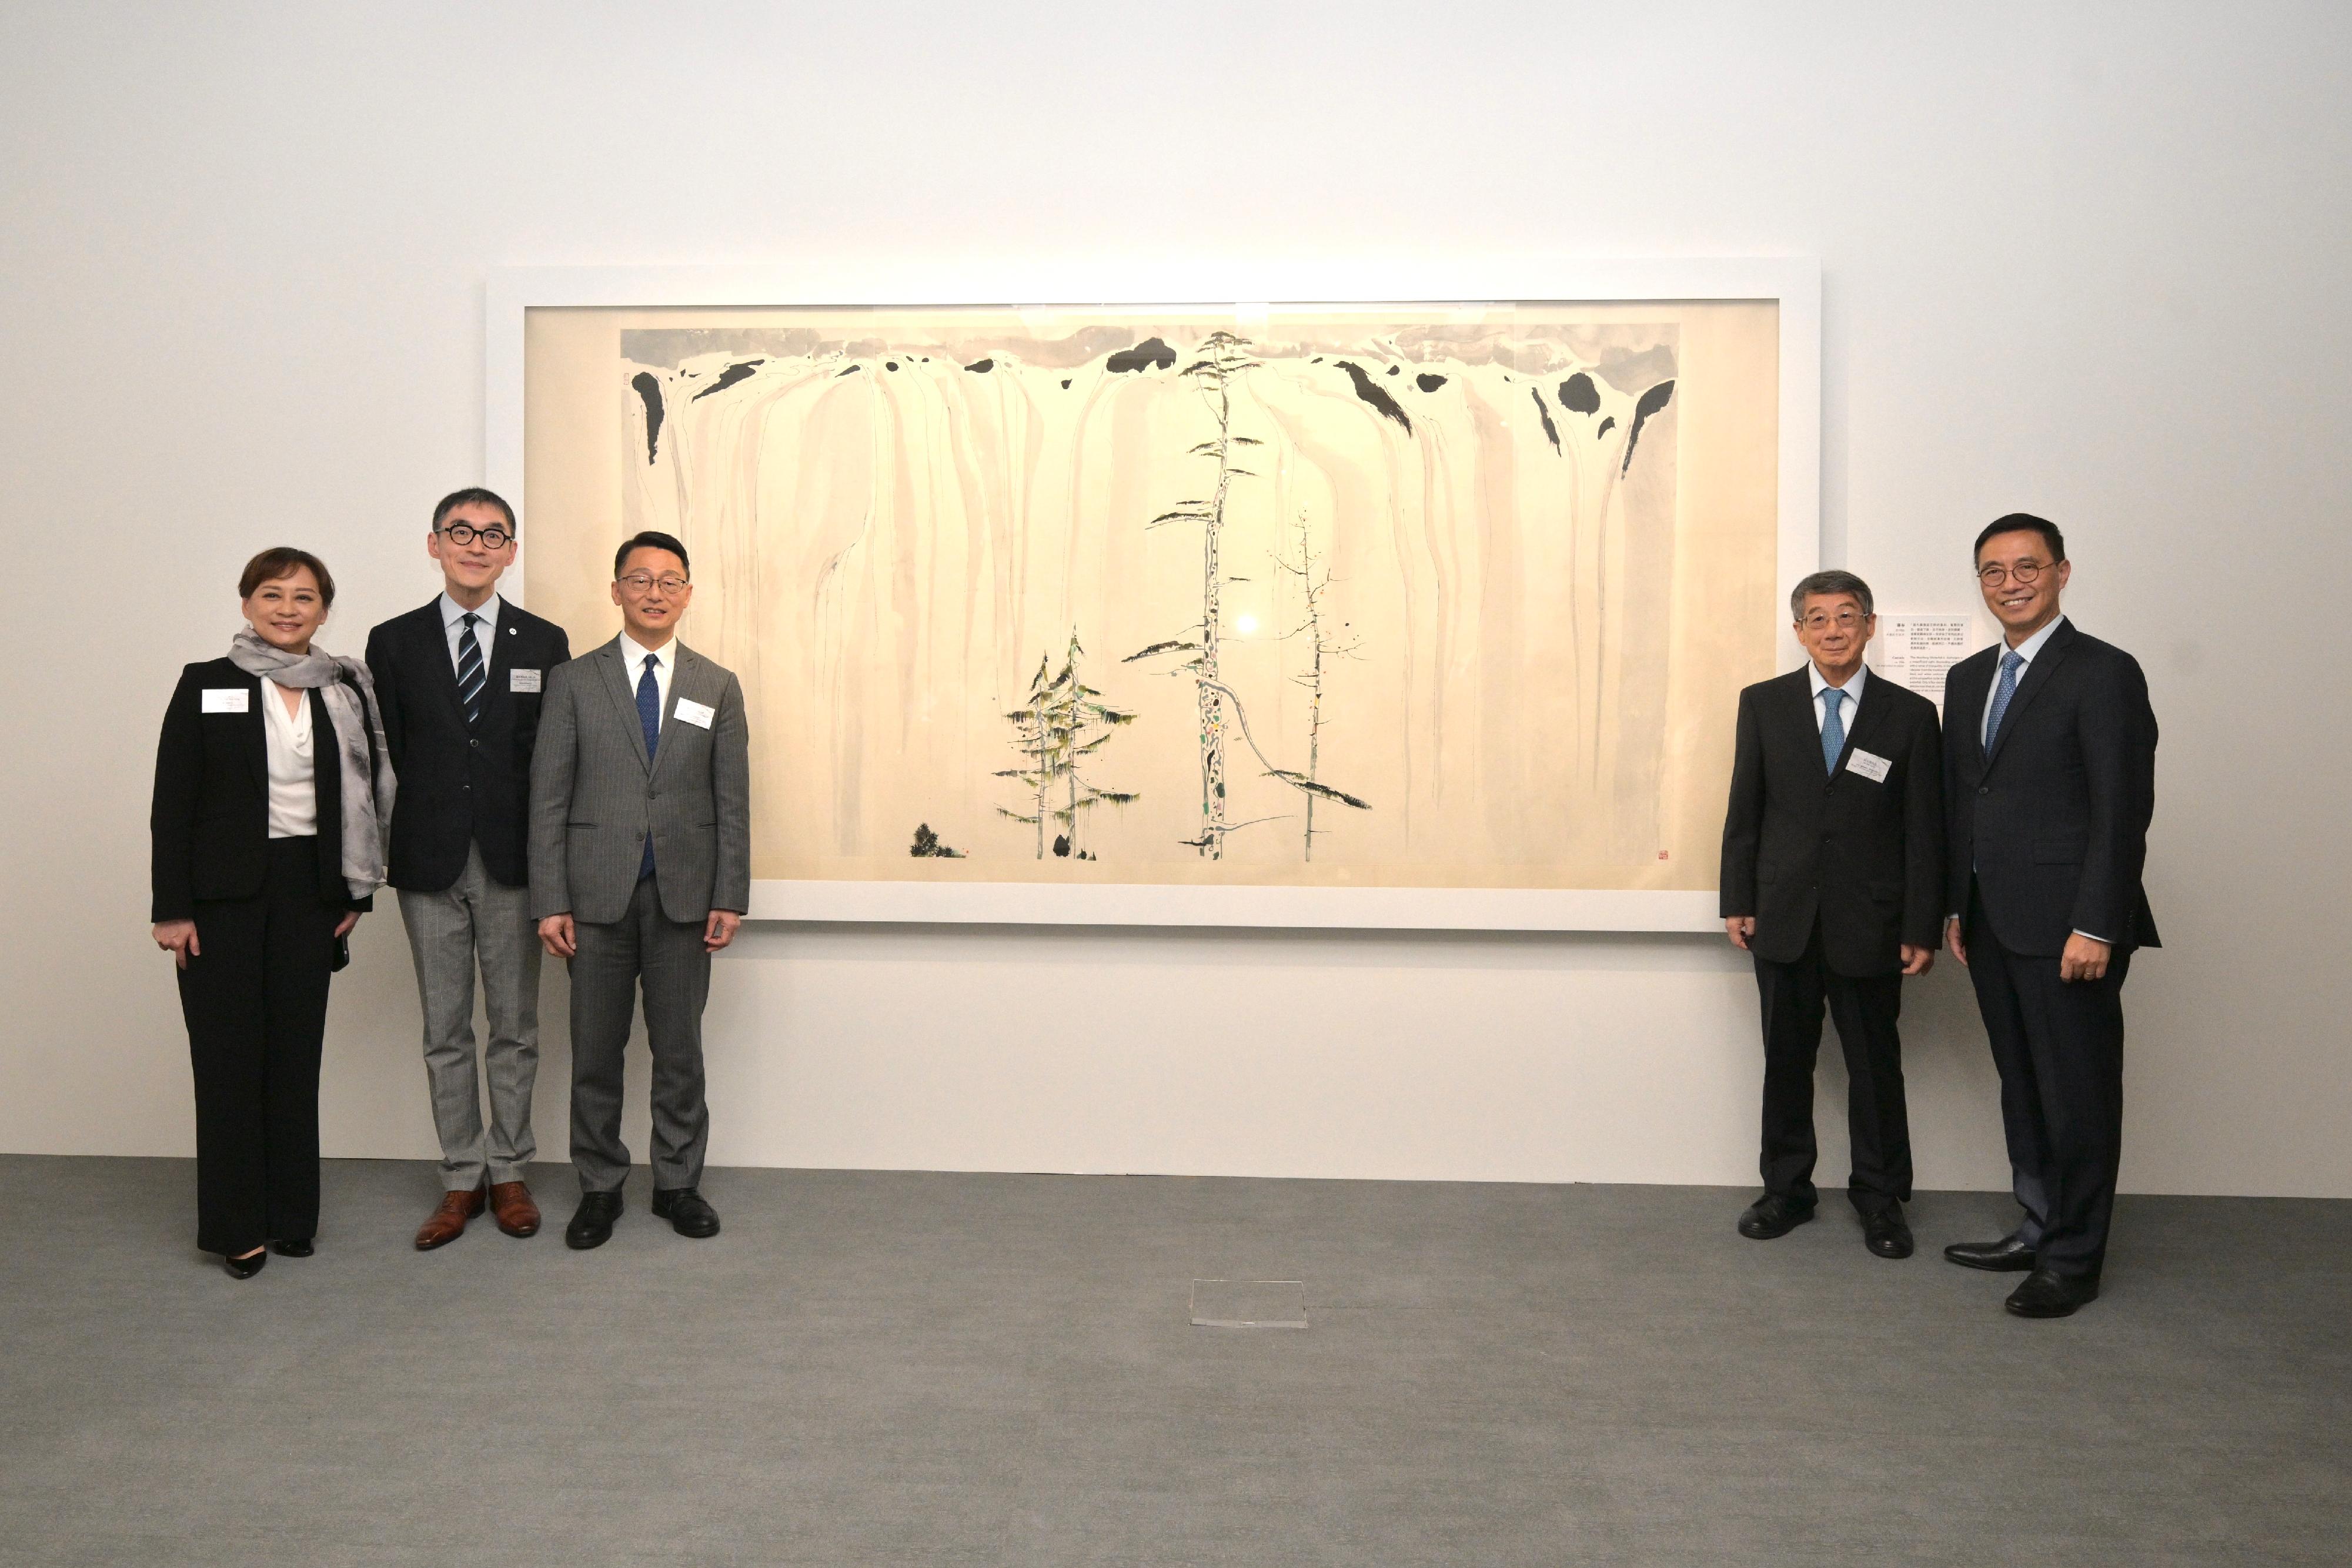 The acknowledgement ceremony for the Wu Guanzhong Art Sponsorship and opening ceremony of related sponsored exhibitions was held today (March 21) at the Hong Kong Museum of Art (HKMoA). Picture shows officiating guests (from right) the Secretary for Culture, Sports and Tourism, Mr Kevin Yeung; the sponsor of the Wu Guanzhong Art Sponsorship, Mr Wu Keyu; the Director of Leisure and Cultural Services, Mr Vincent Liu; the Chairman of Museum Advisory Committee, Professor Douglas So; and the Museum Director of the HKMoA, Dr Maria Mok, in front of Wu Guanzhong's work "Cascade".